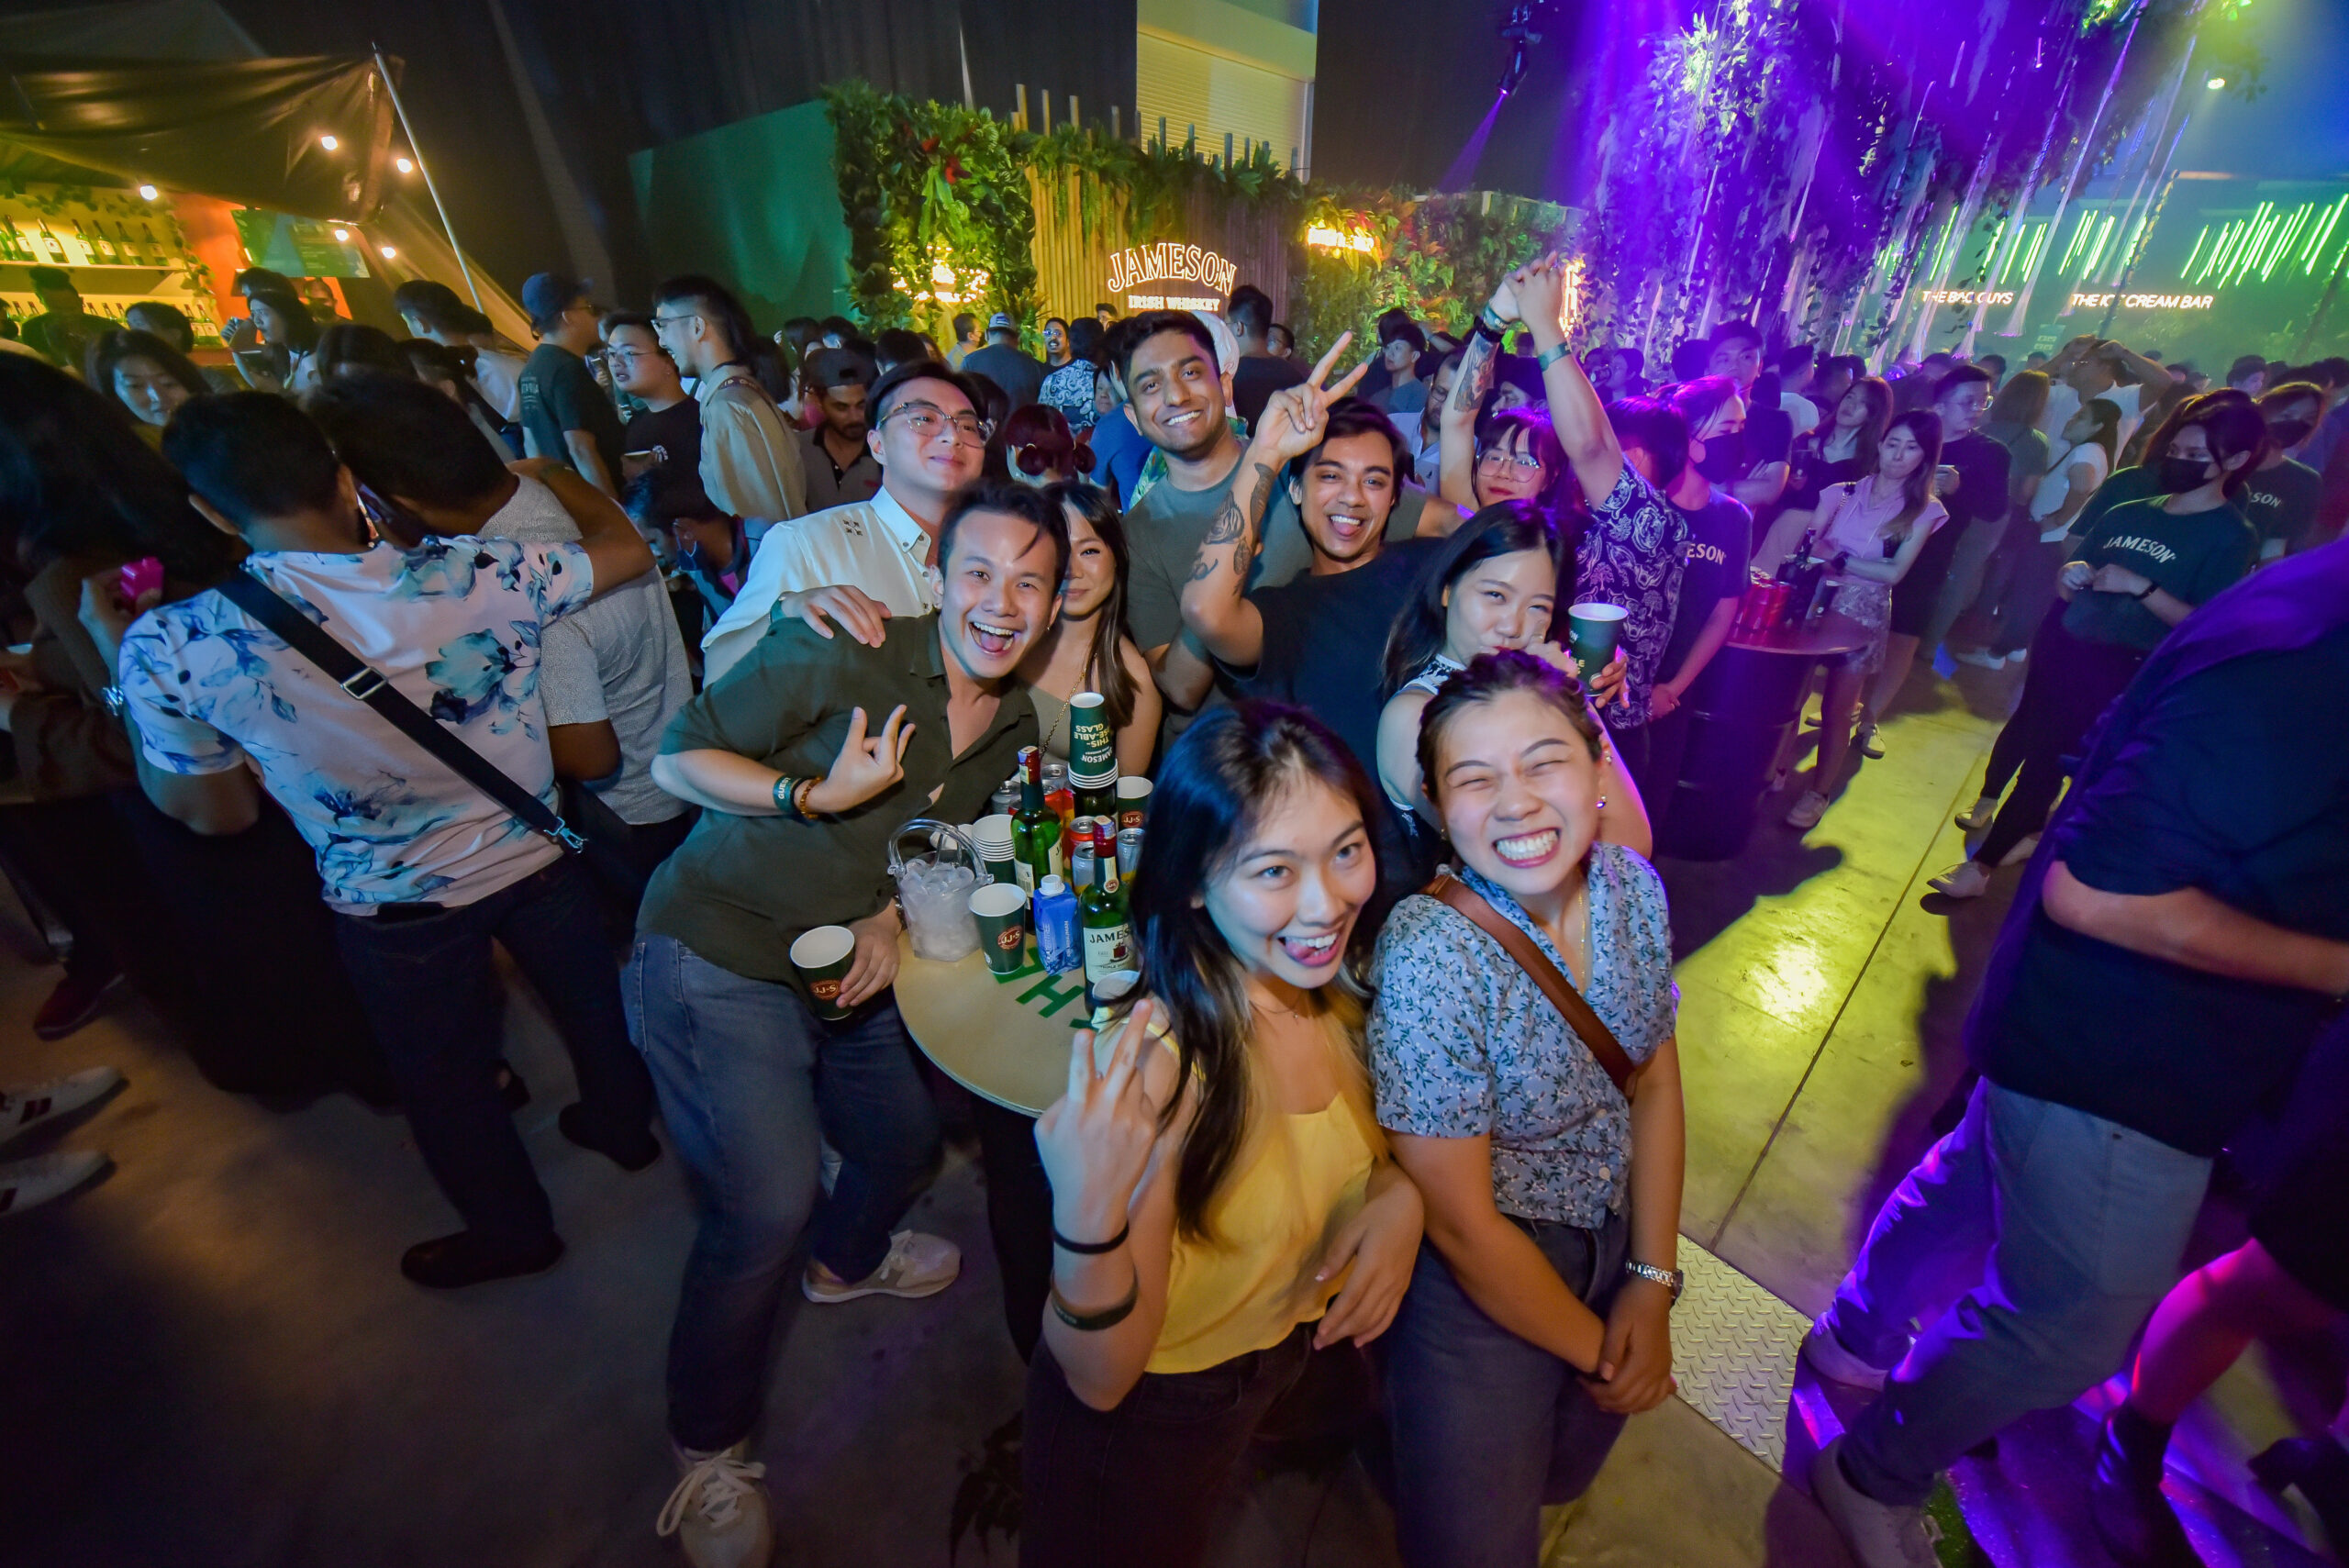 Gather your friends and widen your circle at jameson’s welcome to the jungle | weirdkaya